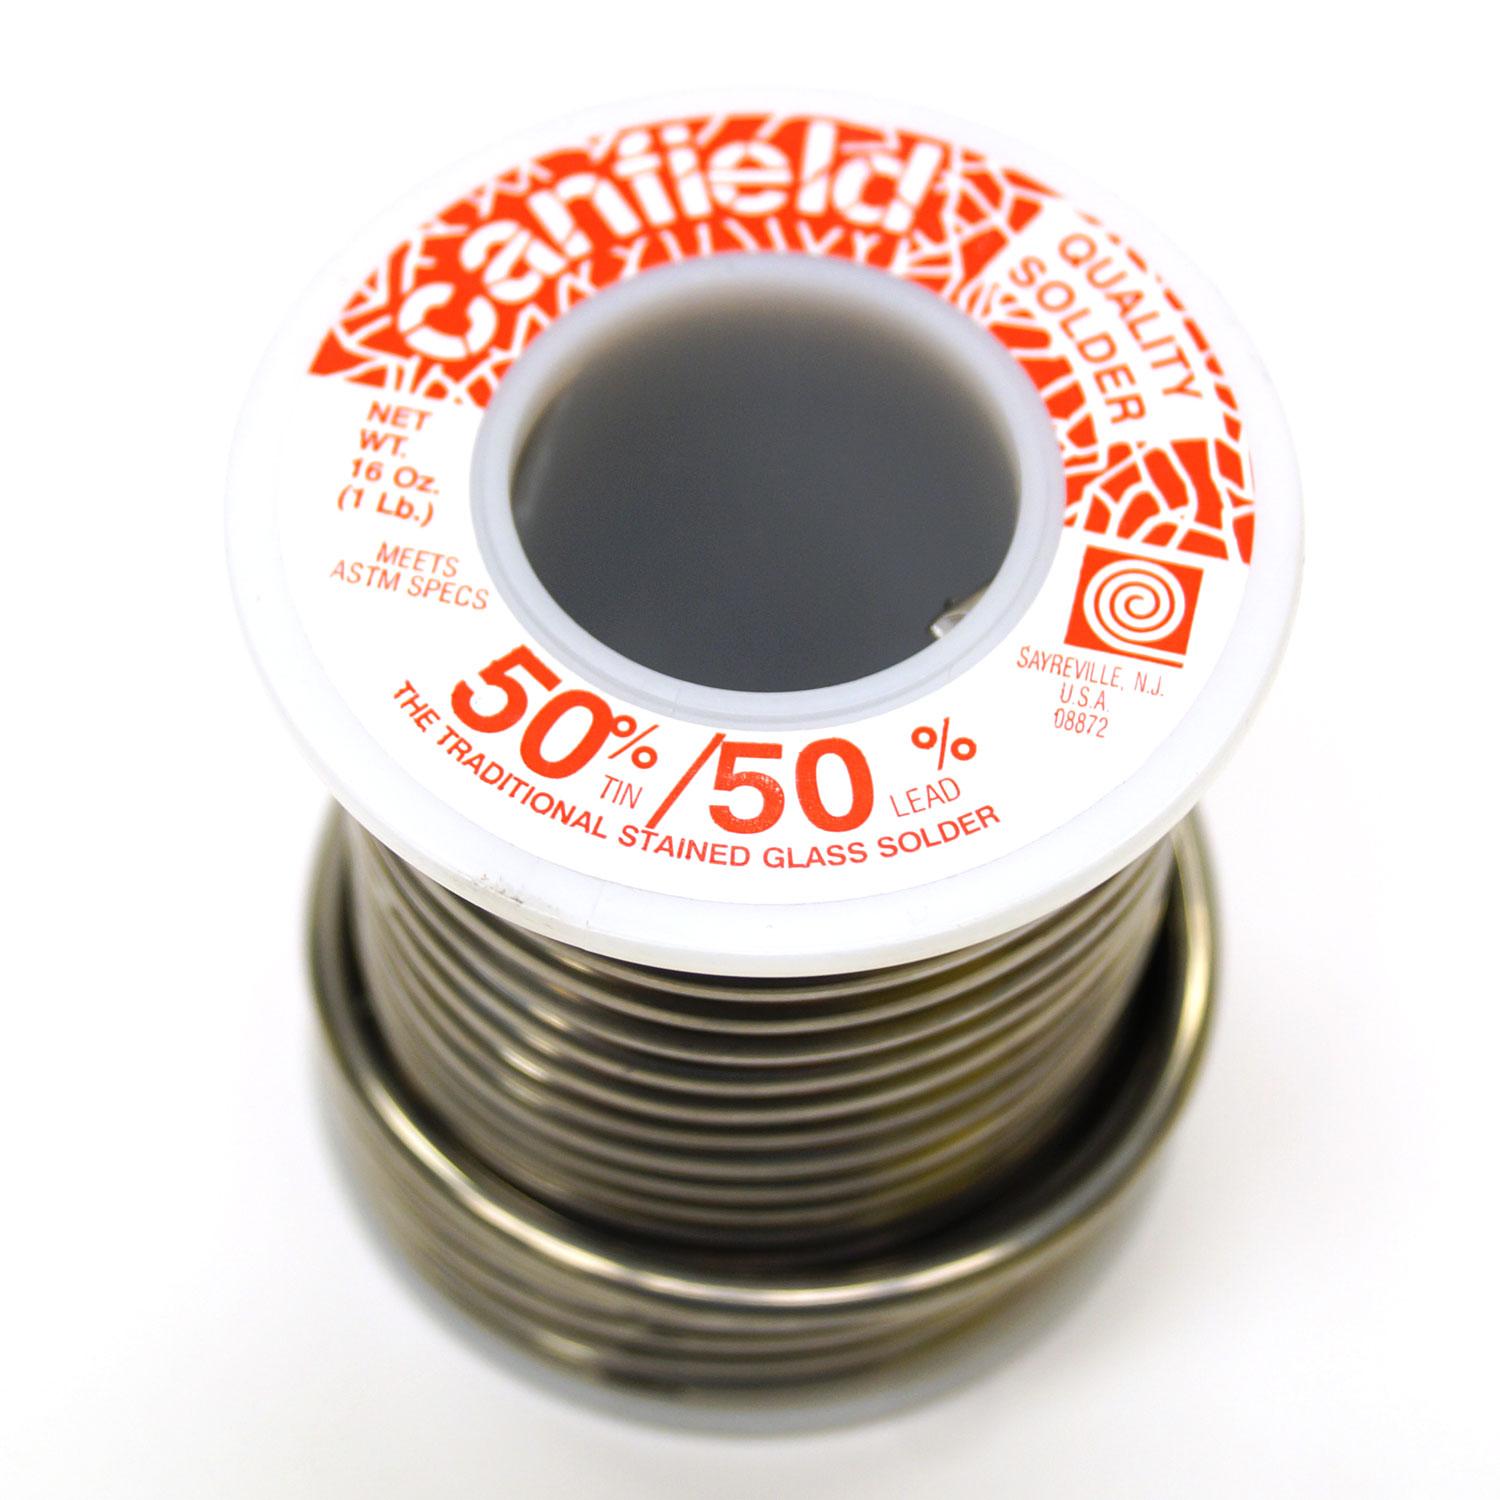 Canfield 50/50 Solder for Stained Glass 1 lb Spool